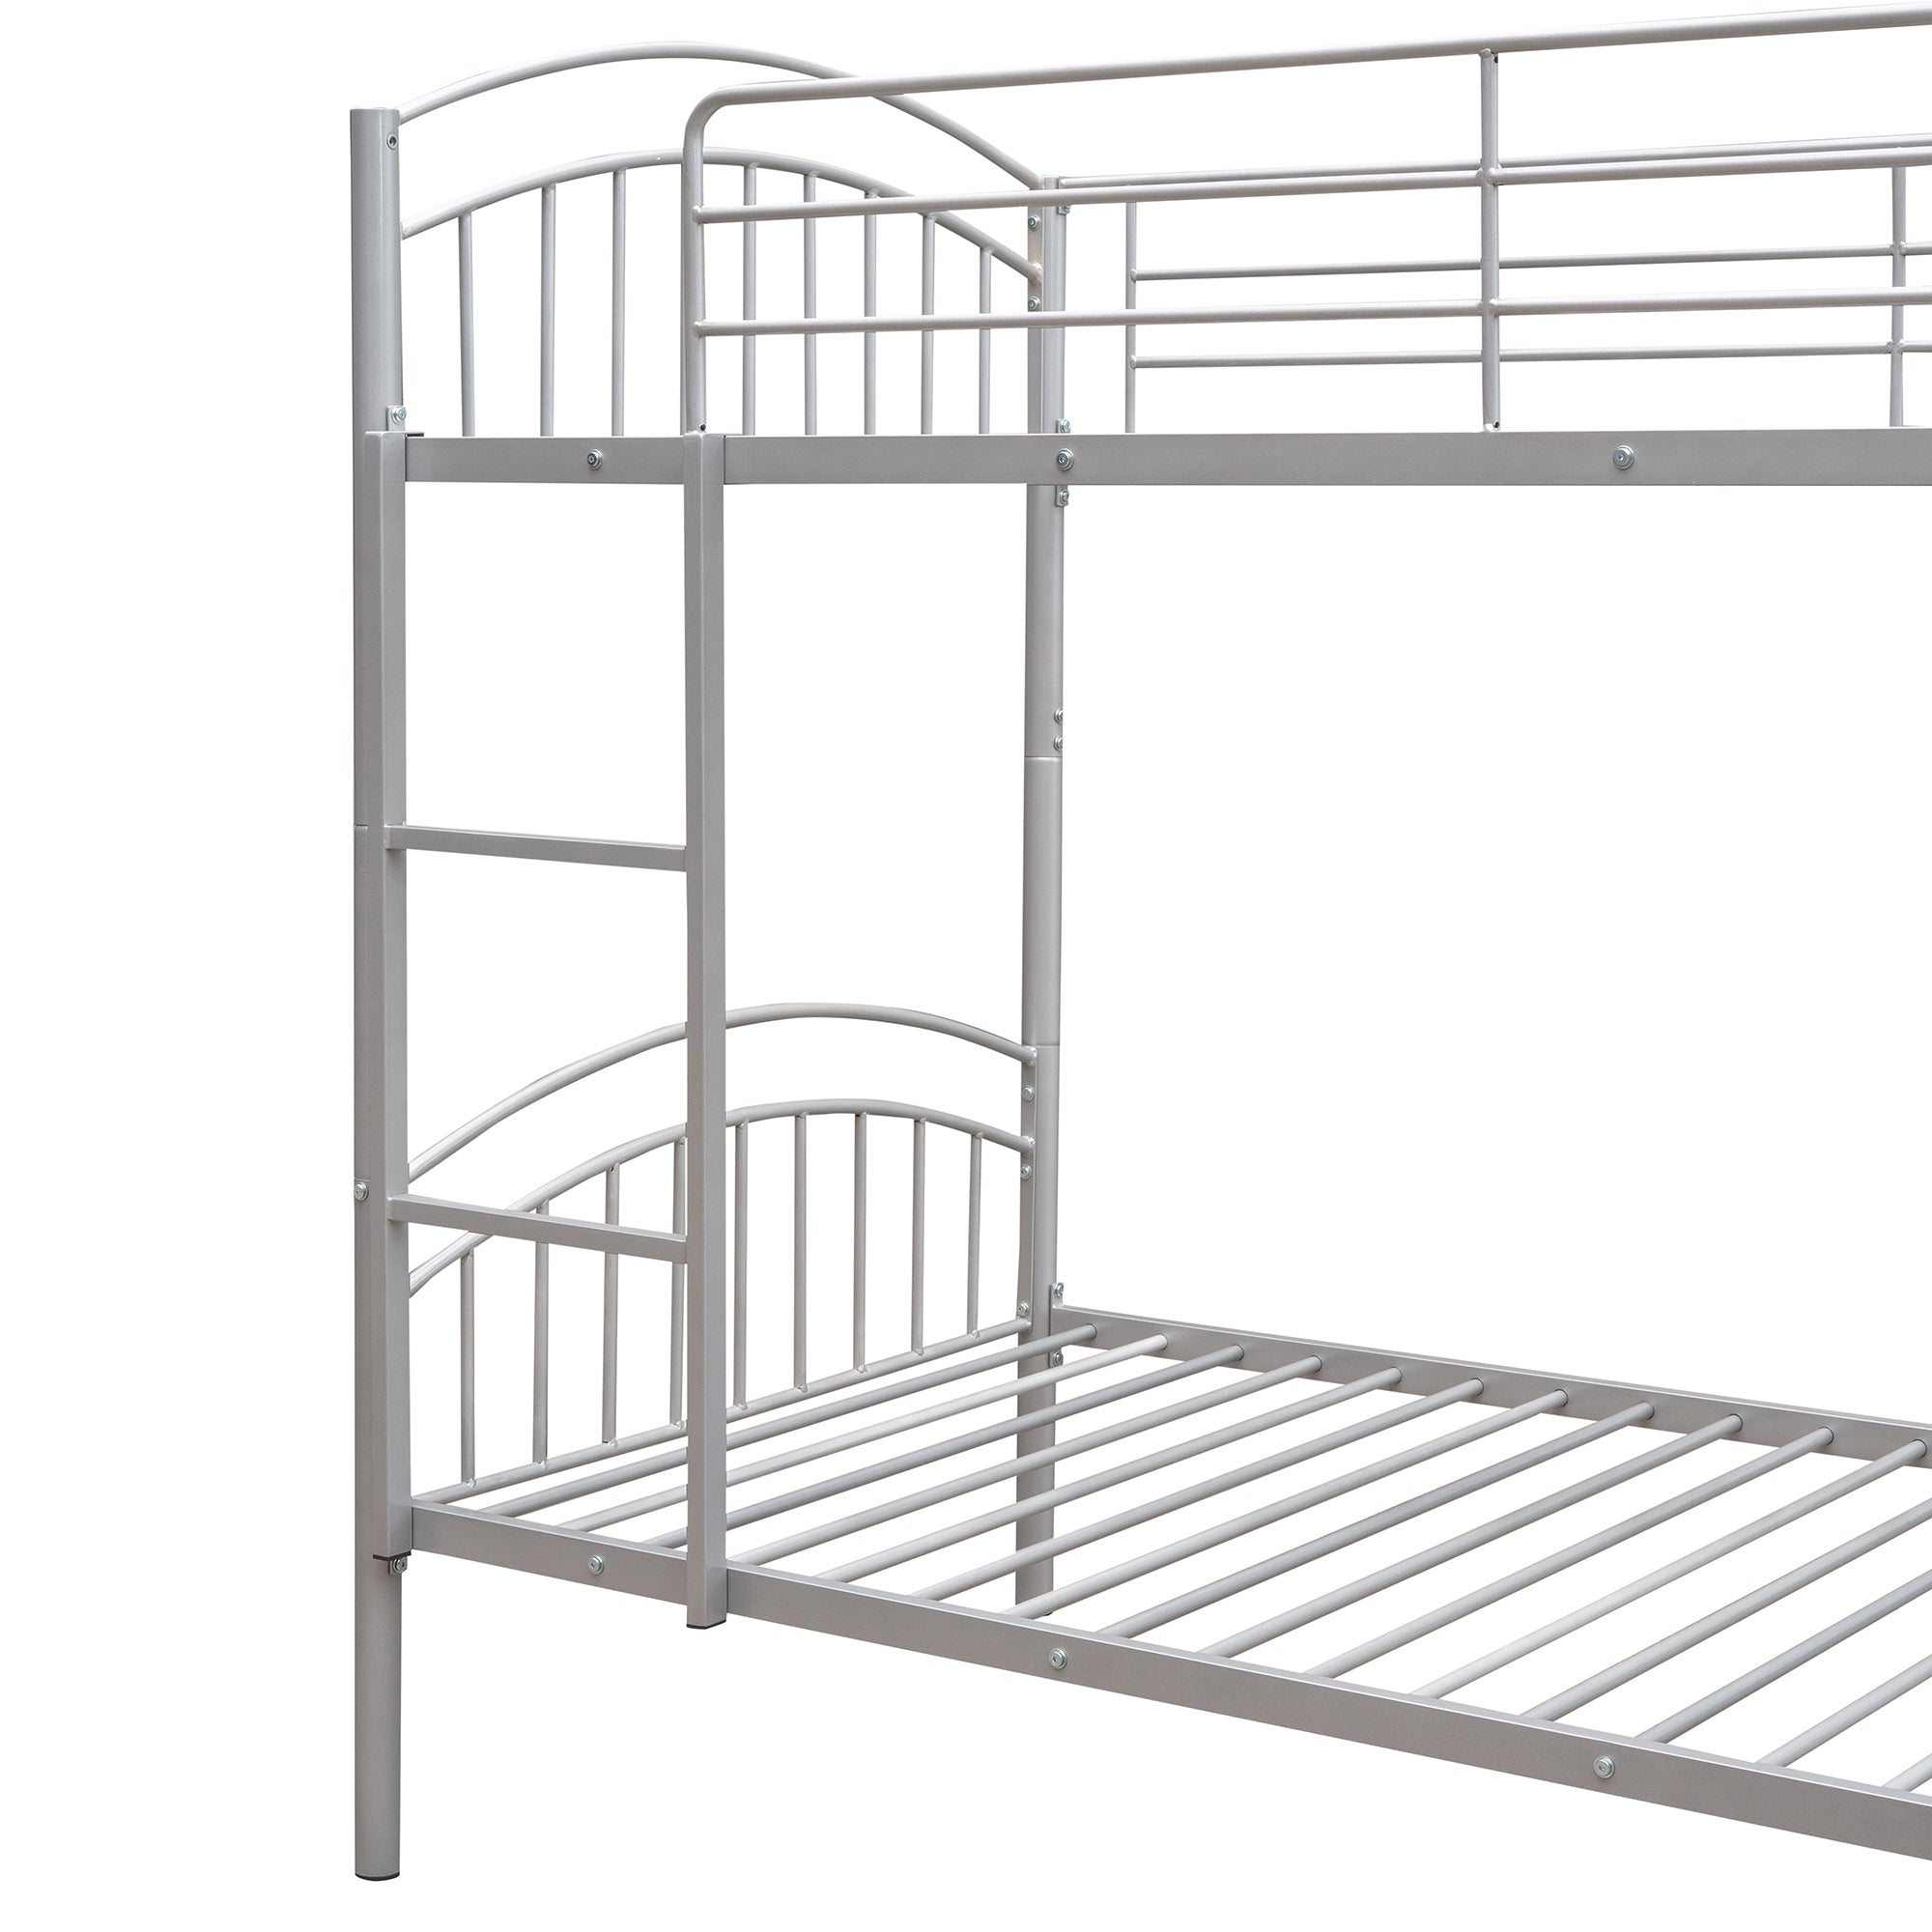 Twin Over Twin Metal Bunk Bed,Divided into Two Beds silver-metal